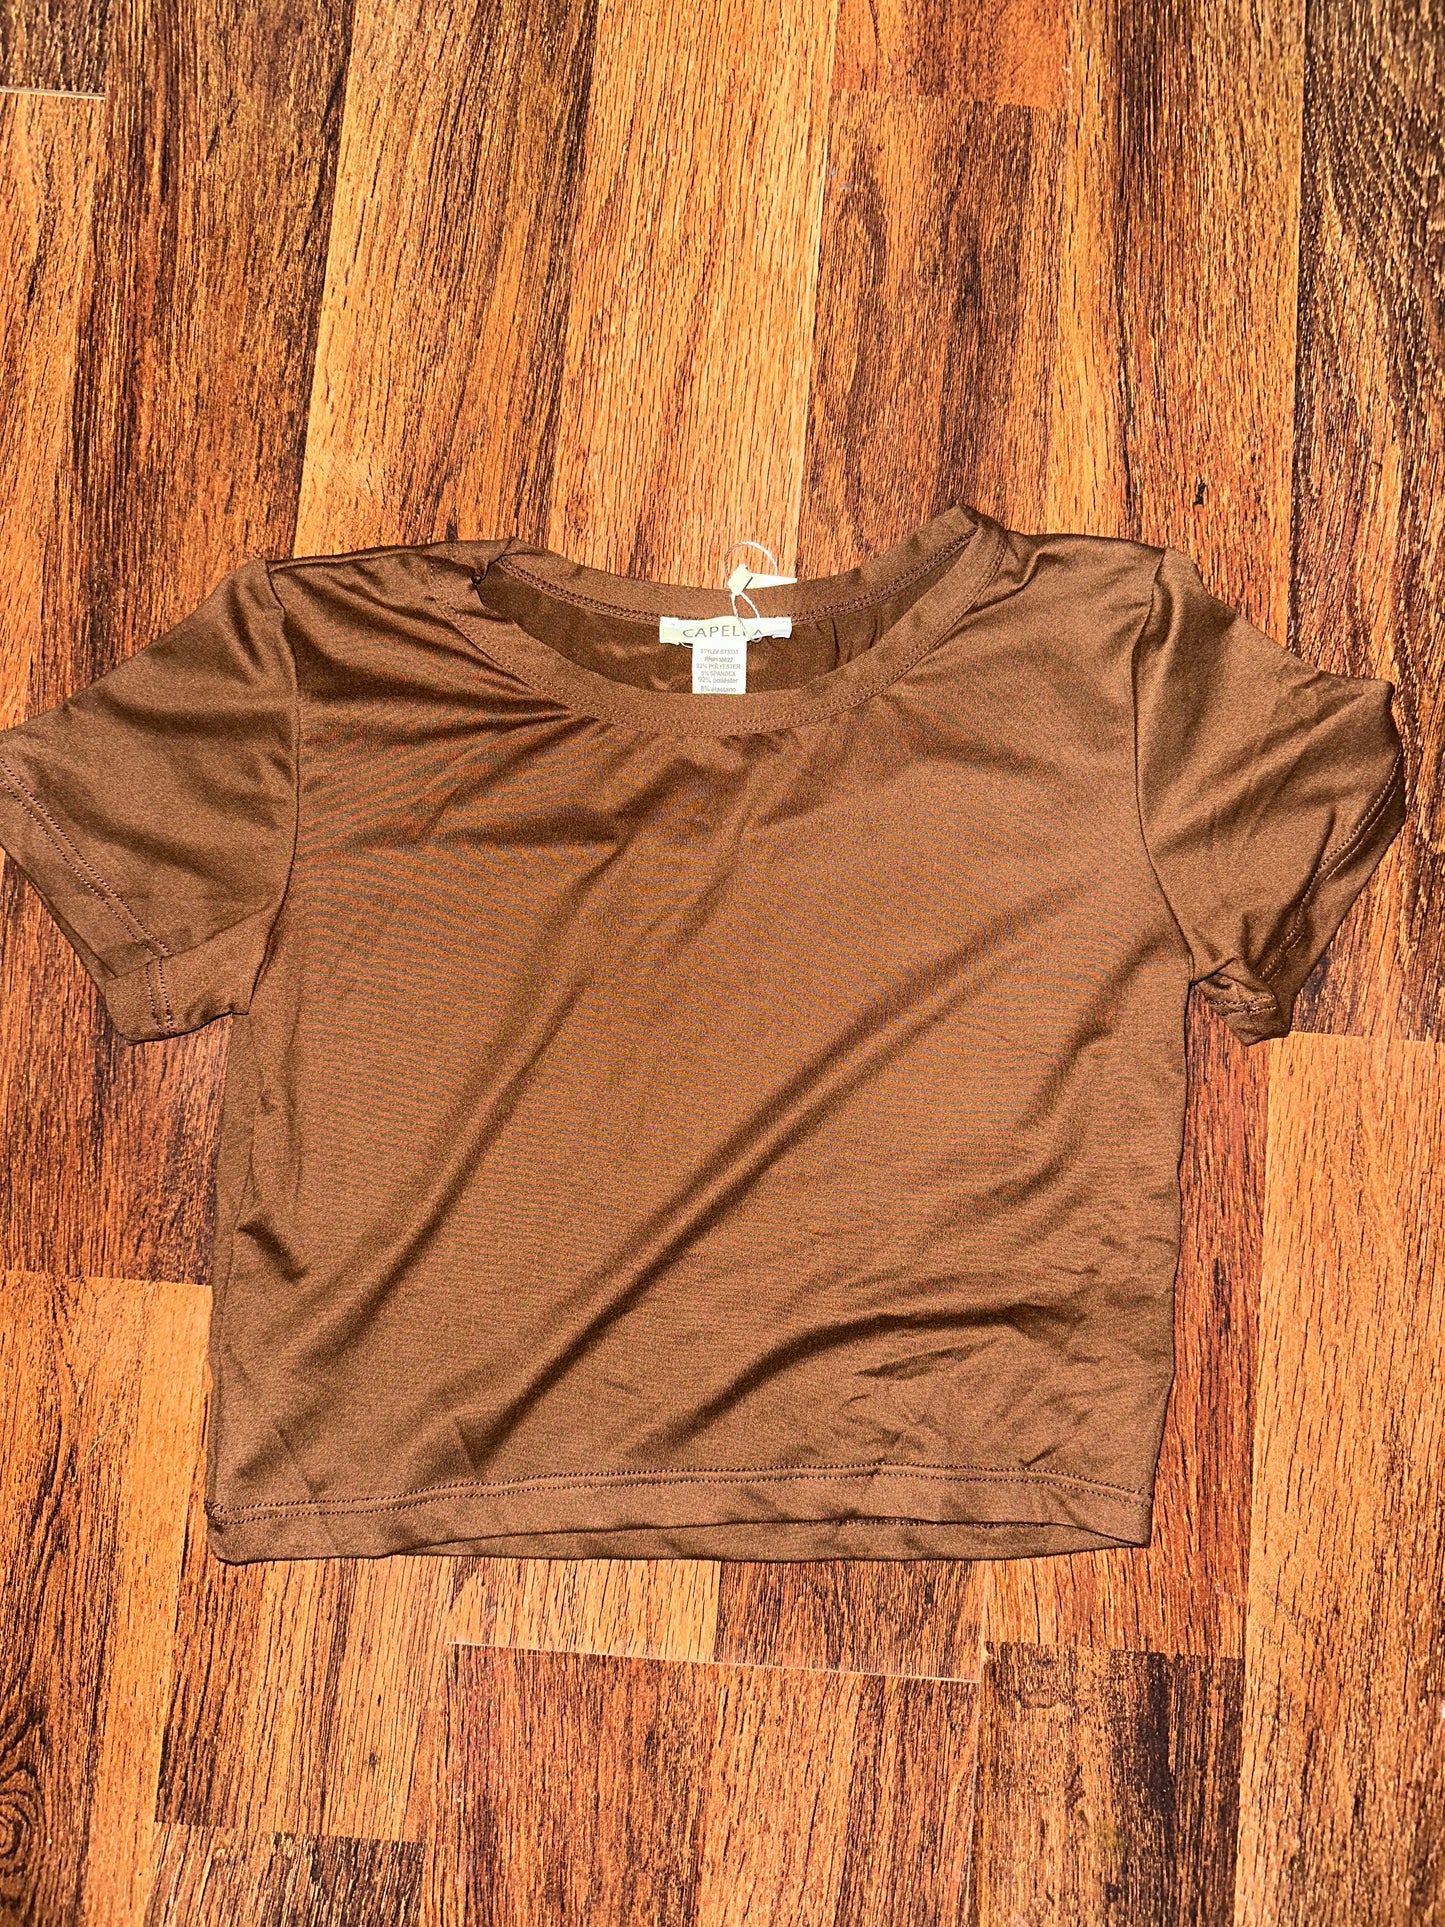 Brown Cropped Baby Tee